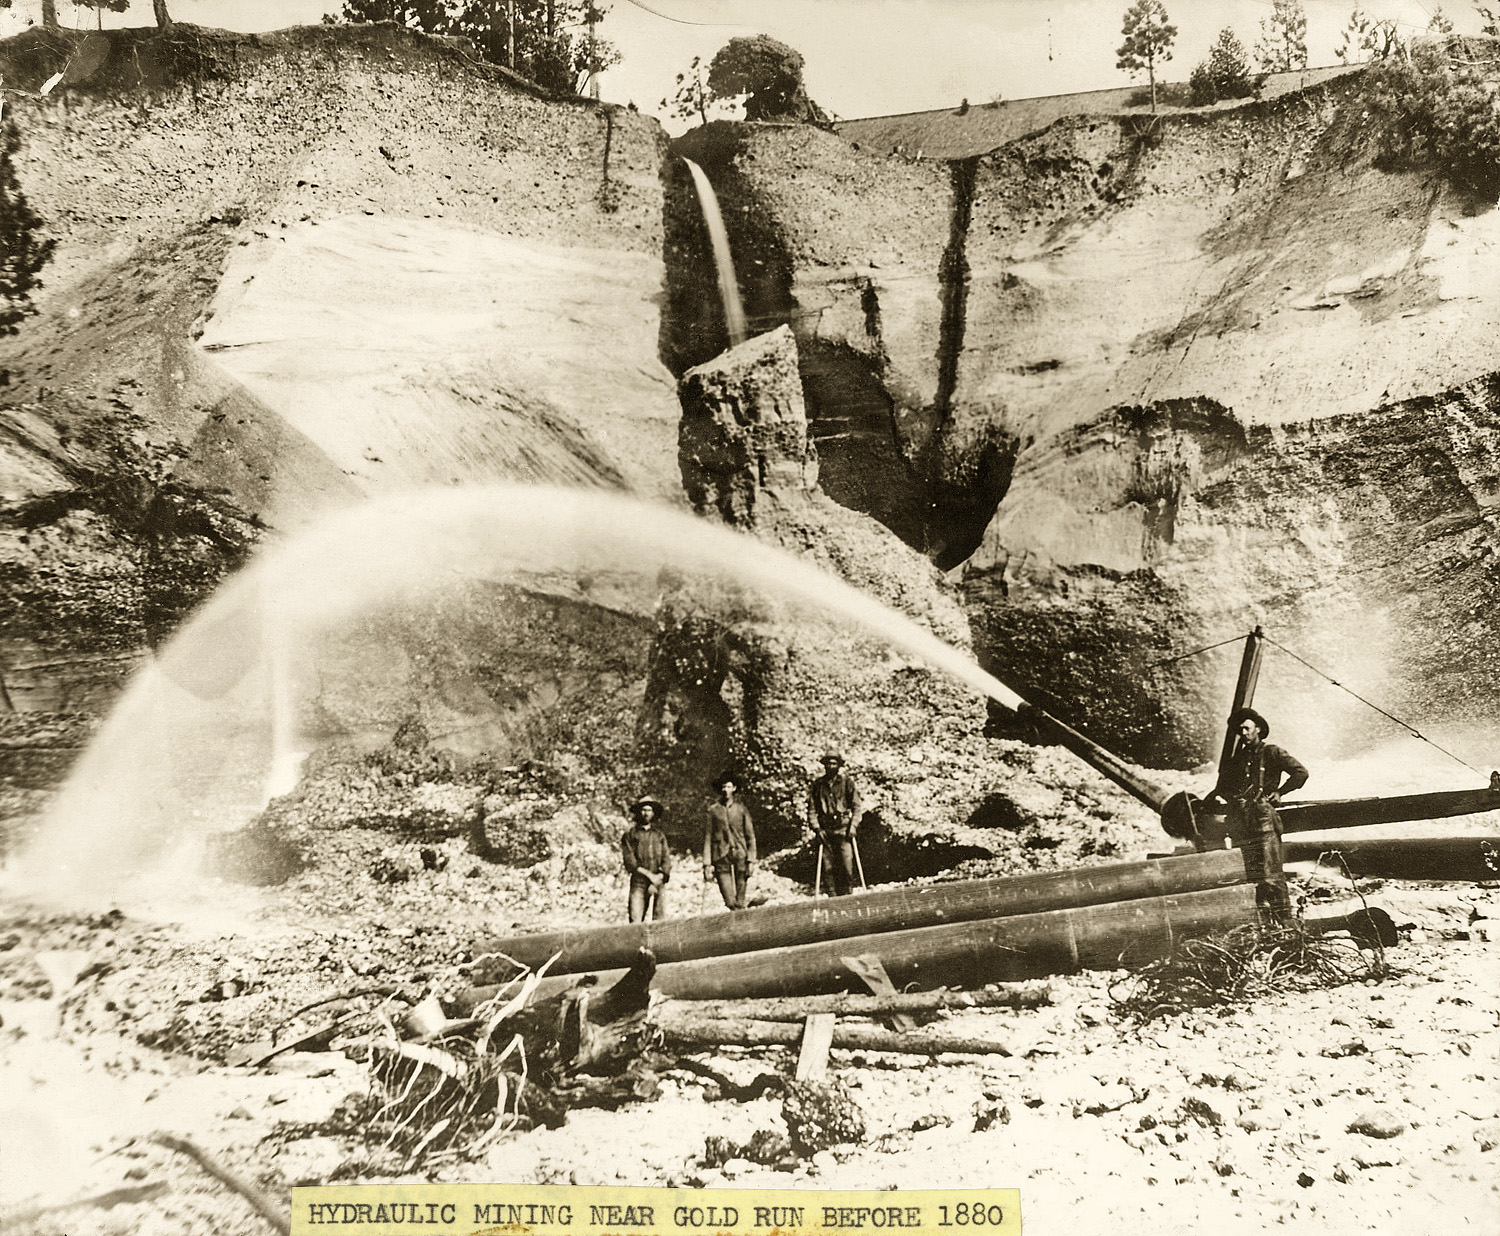 This photograph is from our collections at the Placer County Museums.  It depicts hydraulic mining near Gold Run, California sometime before the 1884 Sawyer Decision effectively ended the practice. View full size.